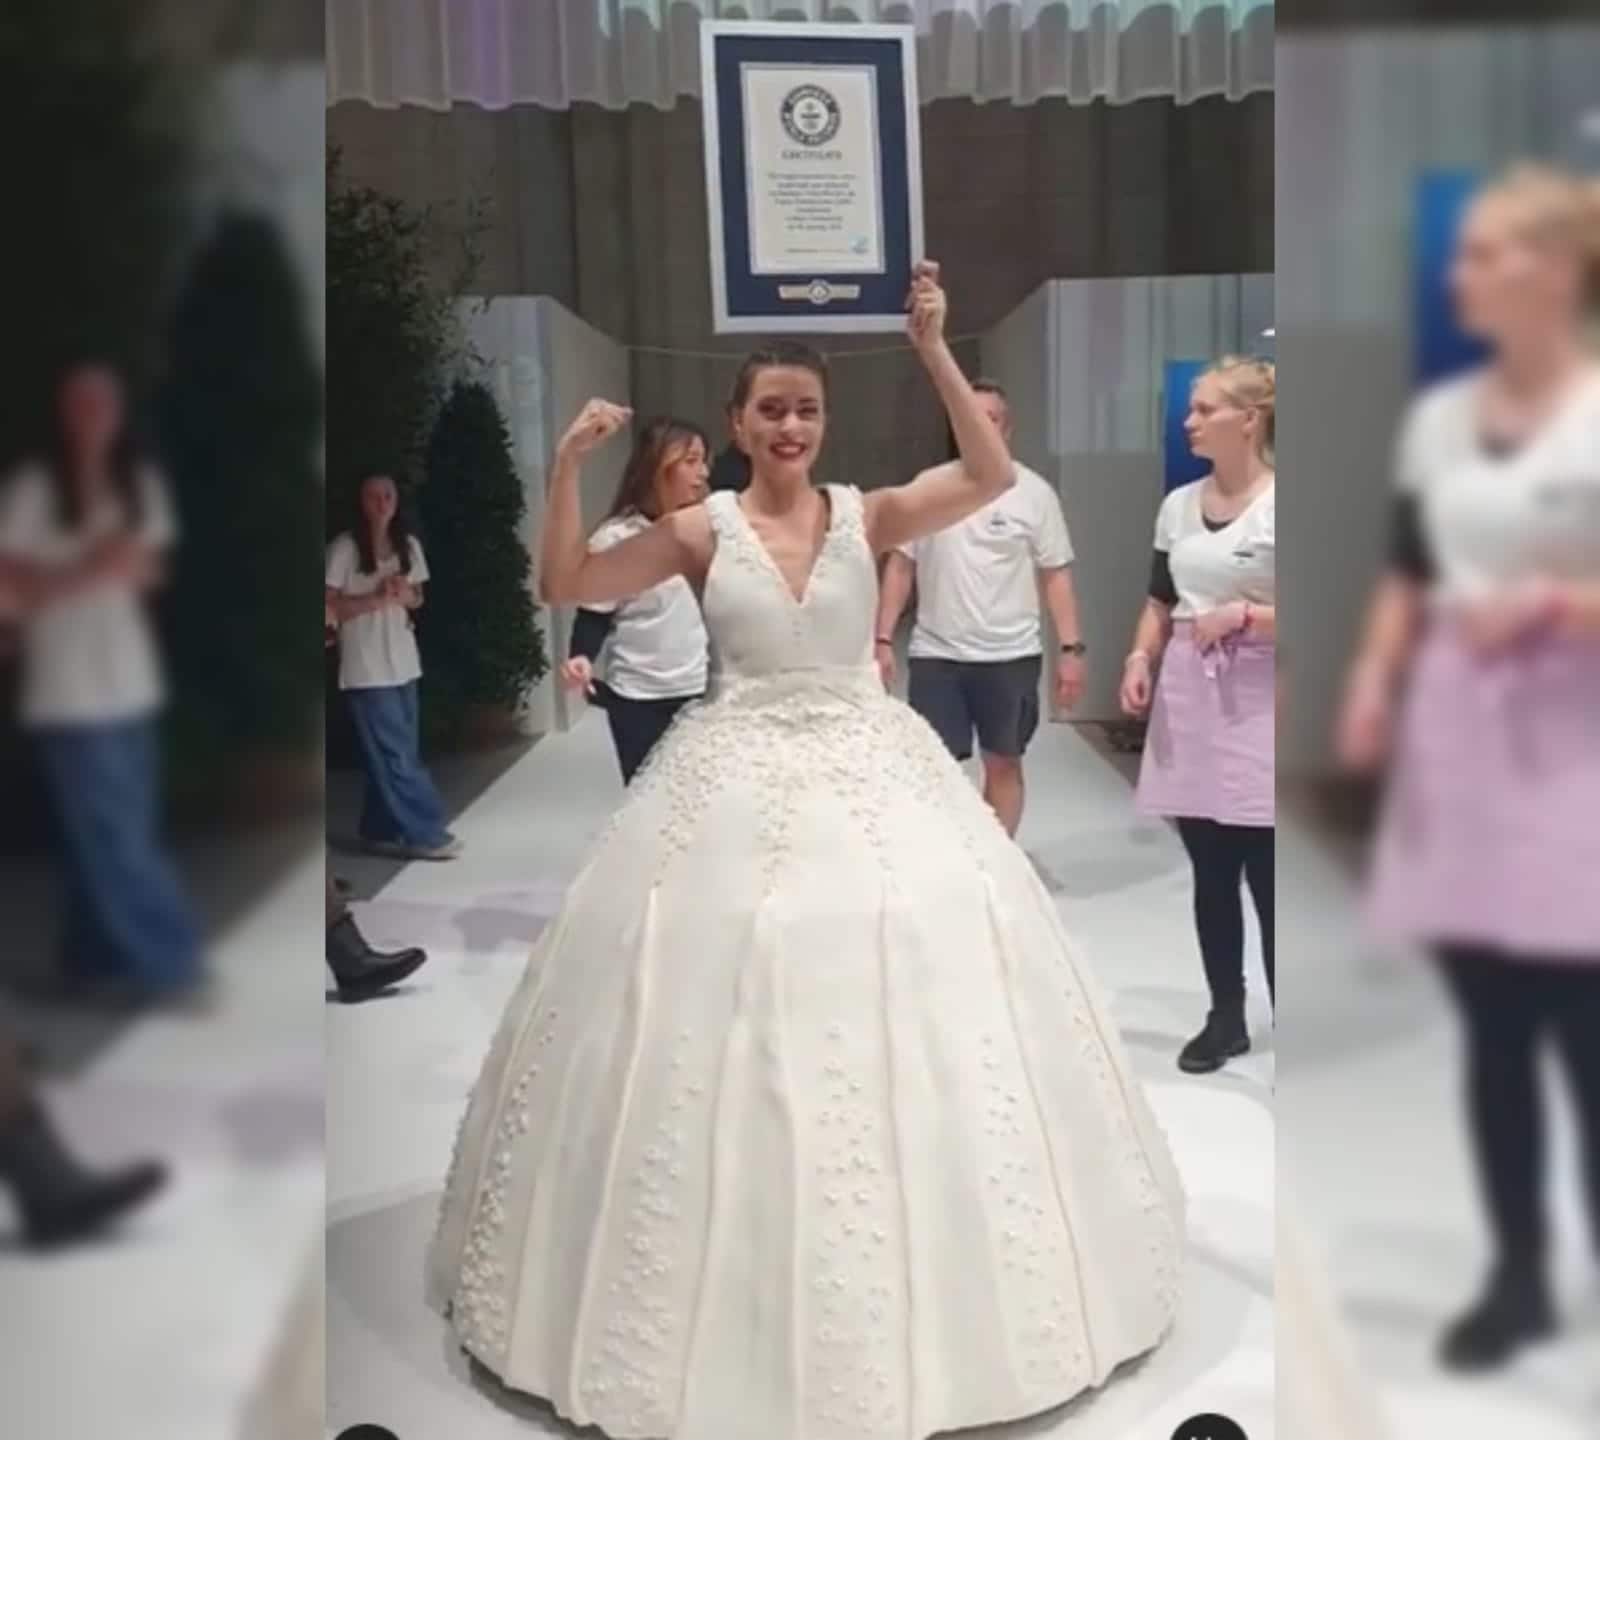 MultiVu - Casino Attempts To Break Guinness World Record For World's  Largest Wedding Cake